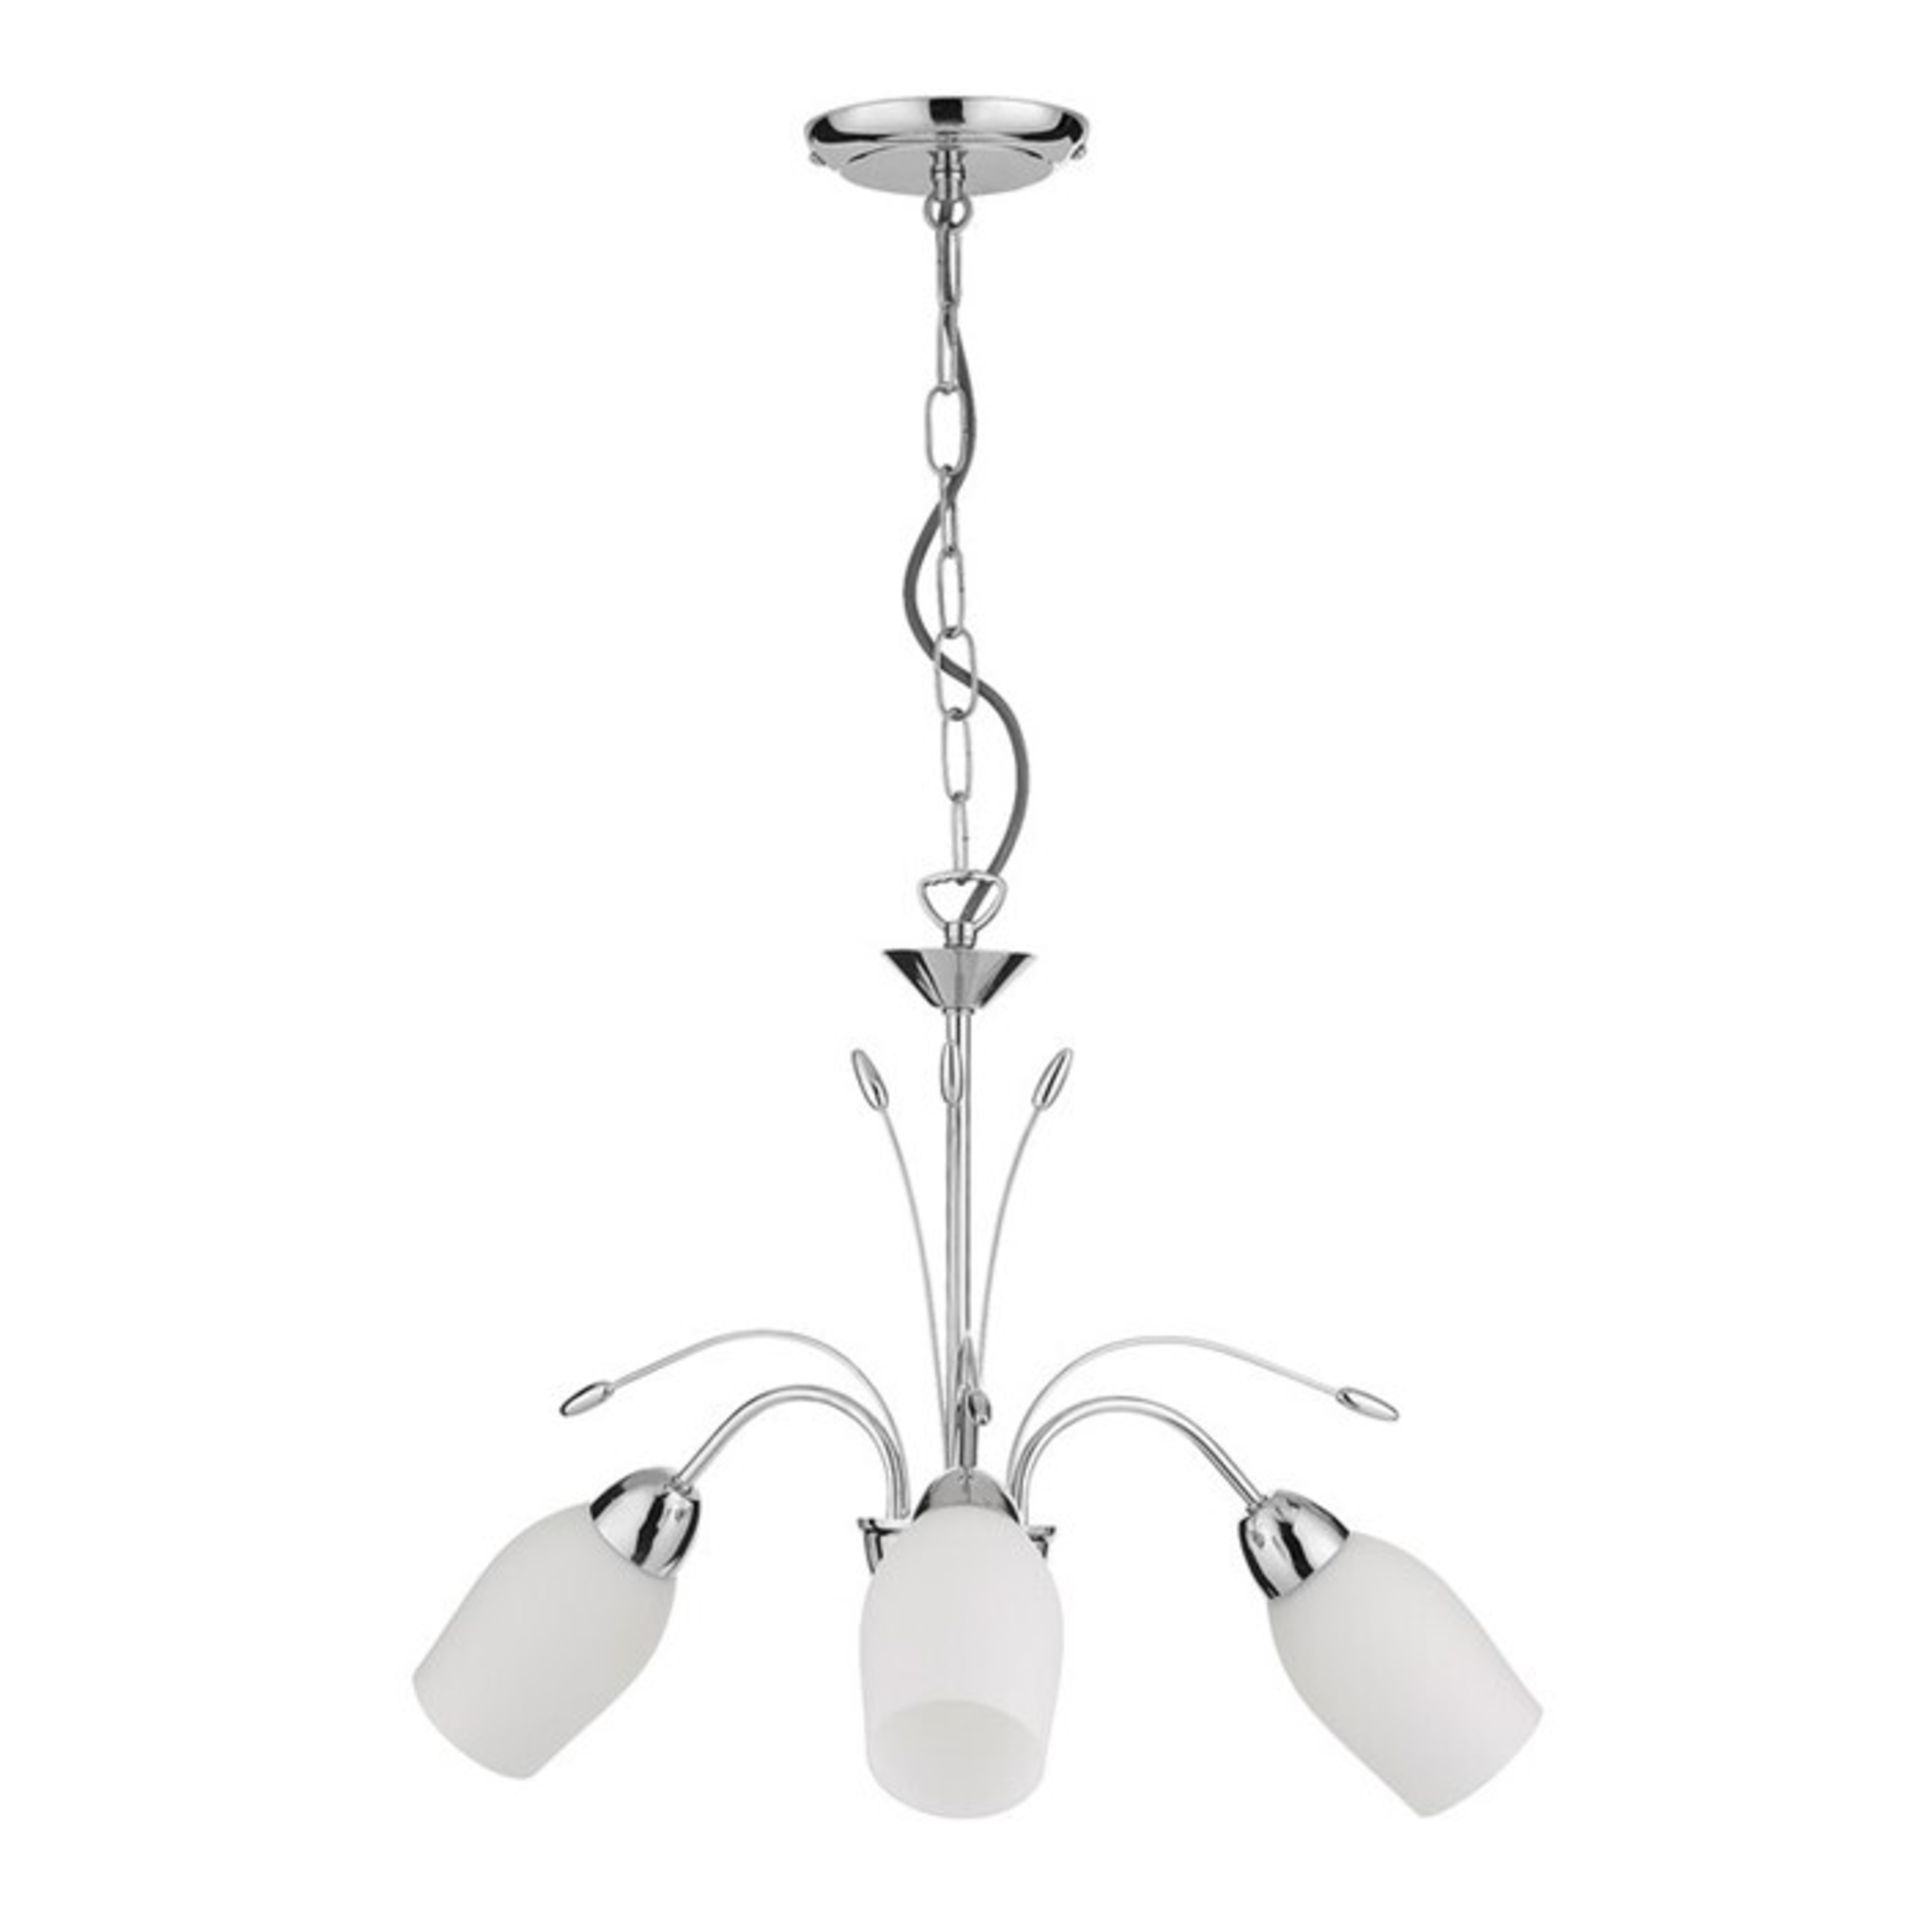 Marlow Home Co., Bronte 3-Light Shaded Chandelier (CHROME WHITE GLASS) - RRP £66.98 (UEL1448 -